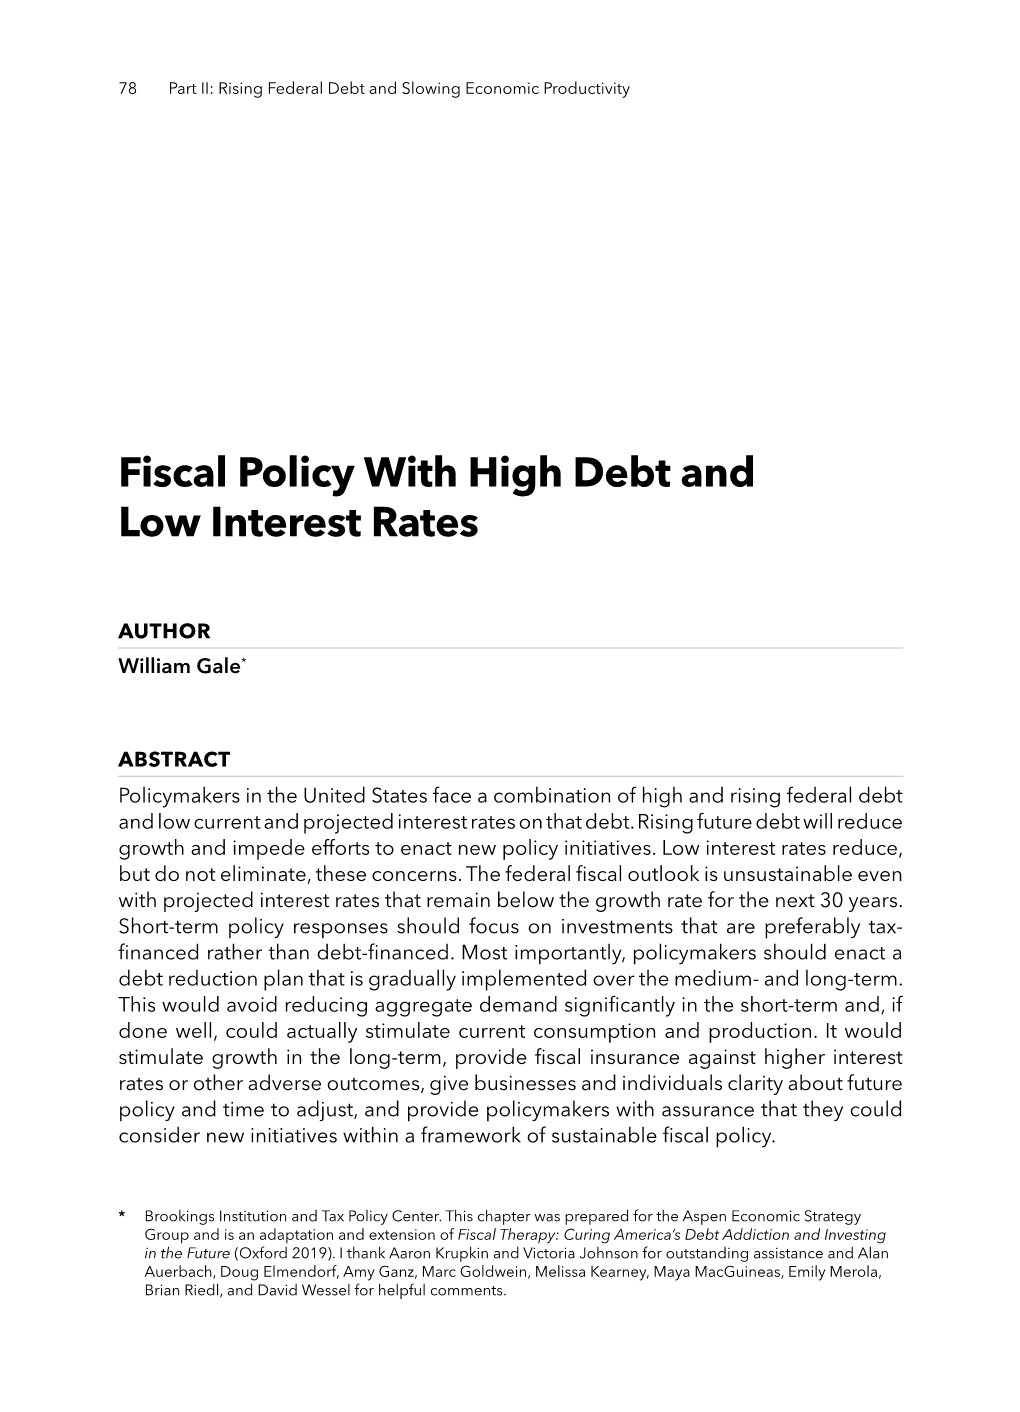 Fiscal Policy with High Debt and Low Interest Rates